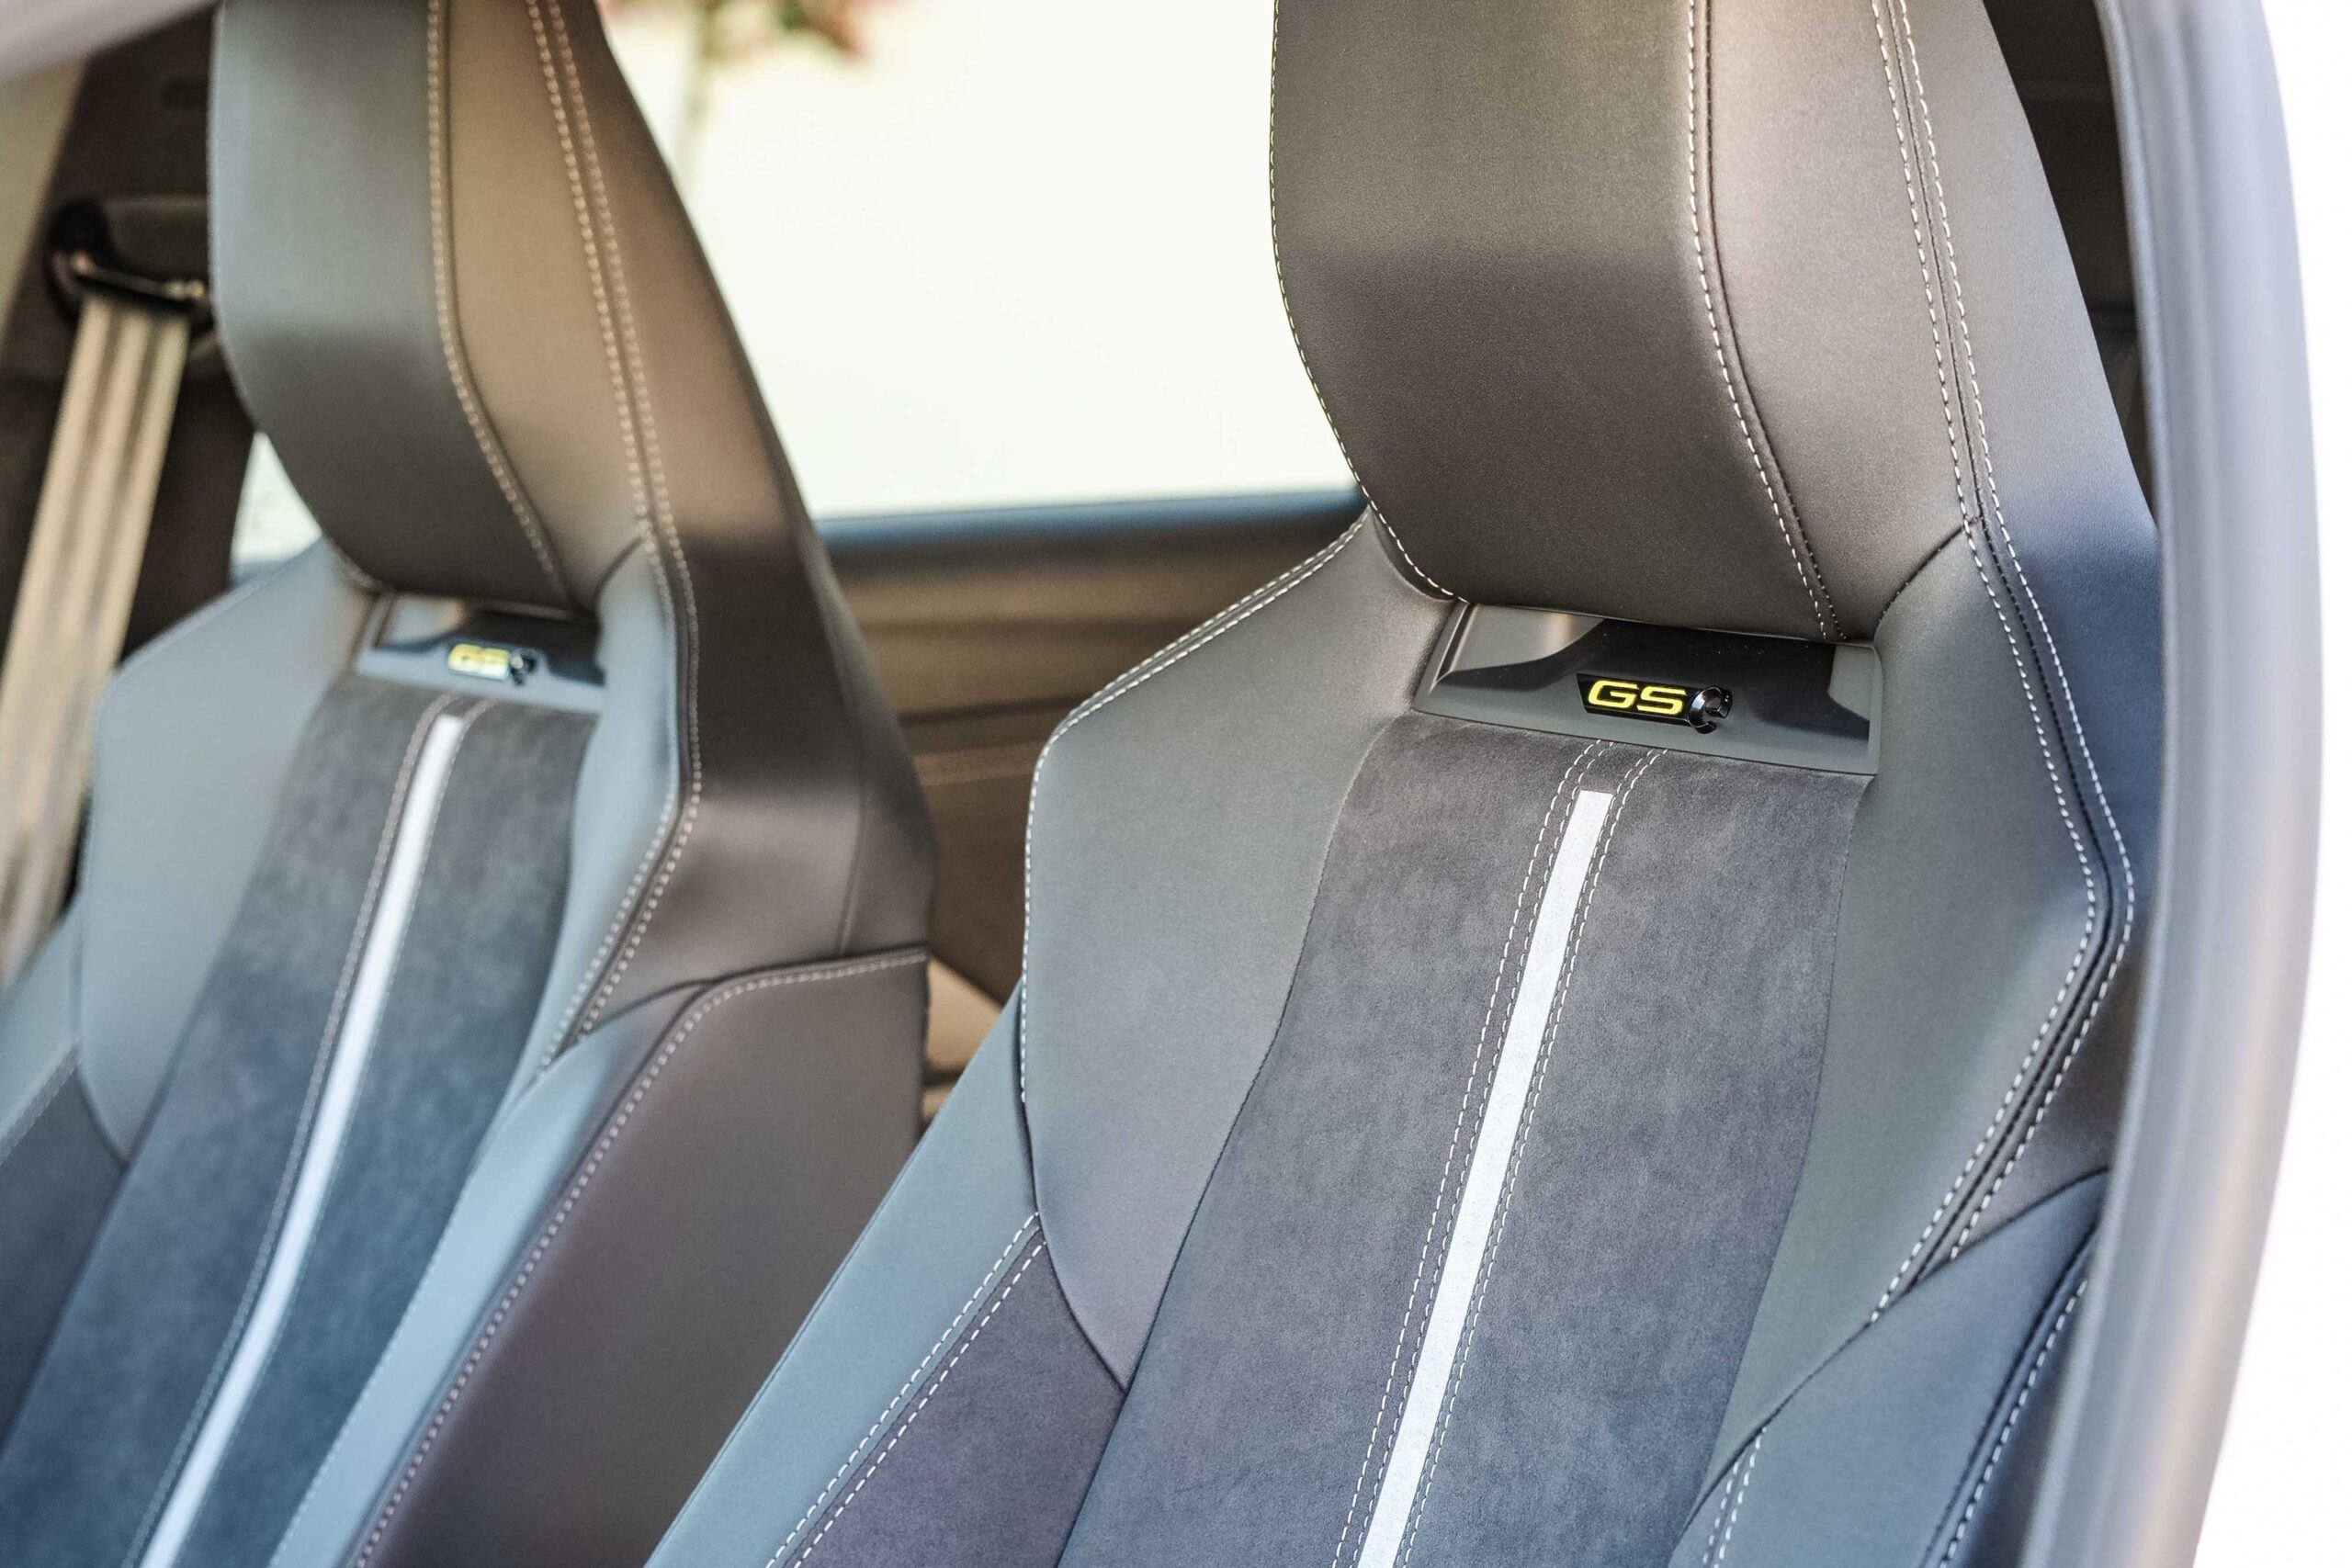 Opel Astra GSe seats